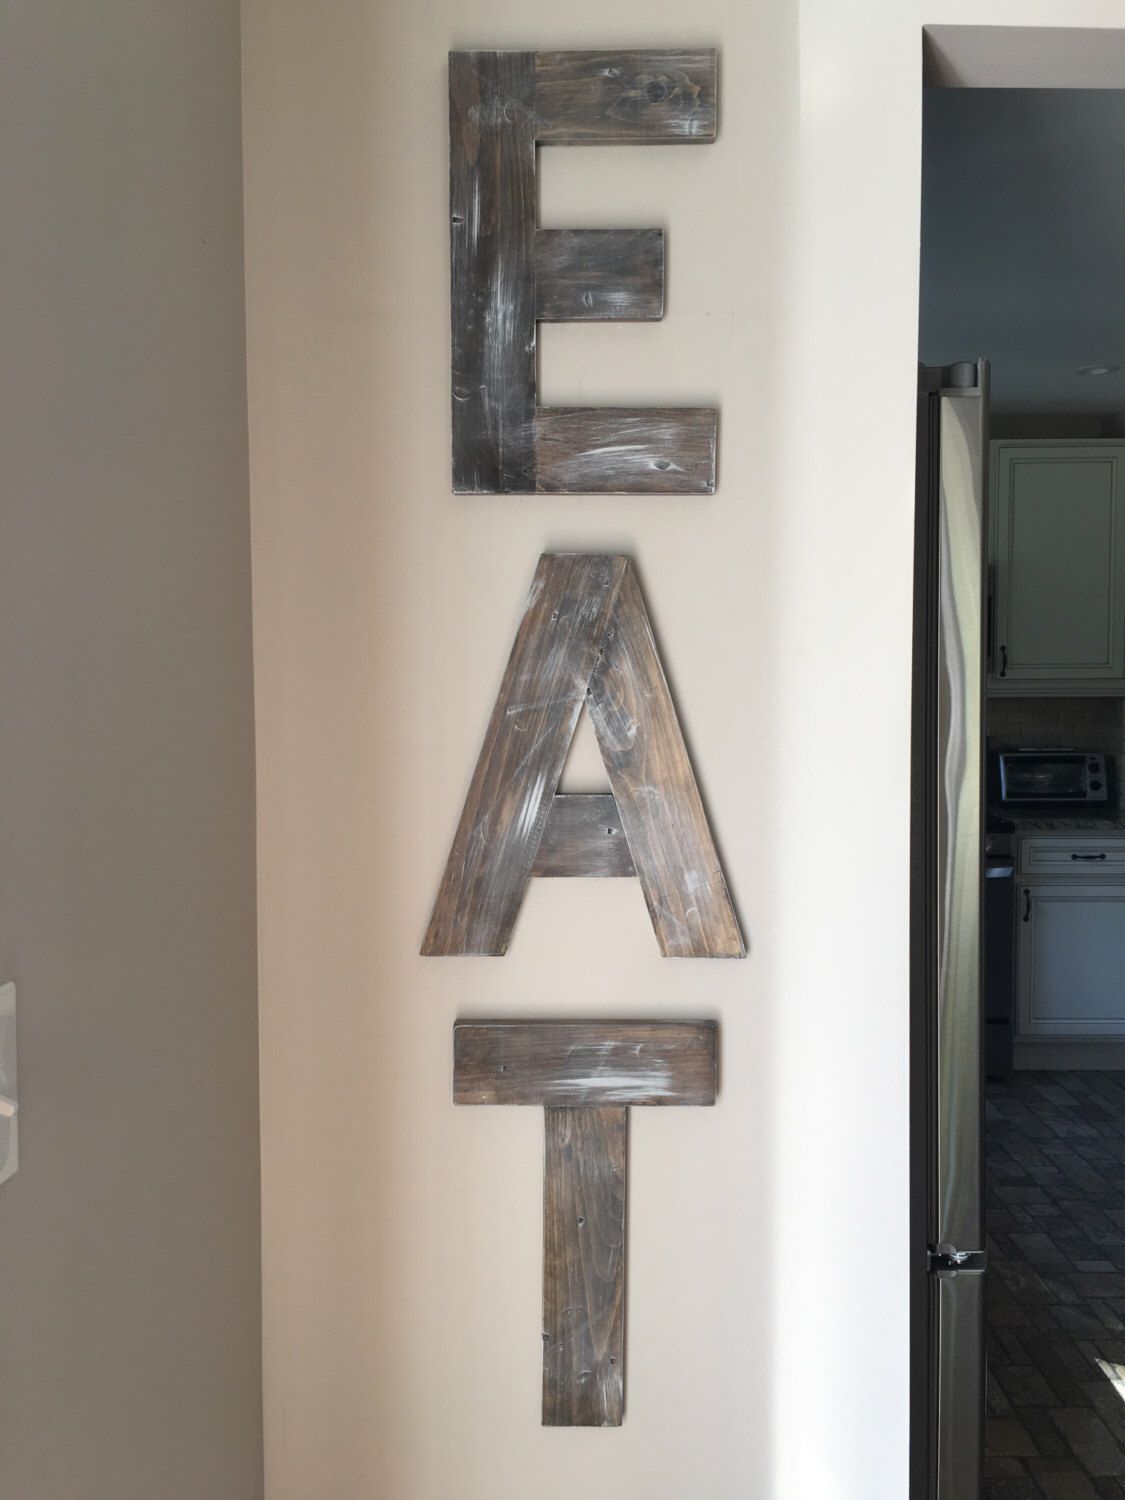 Pindebbie Hibbert On Decor | Diy Kitchen Decor, Home Within Eat Rustic Farmhouse Wood Wall Decor (Photo 5 of 30)